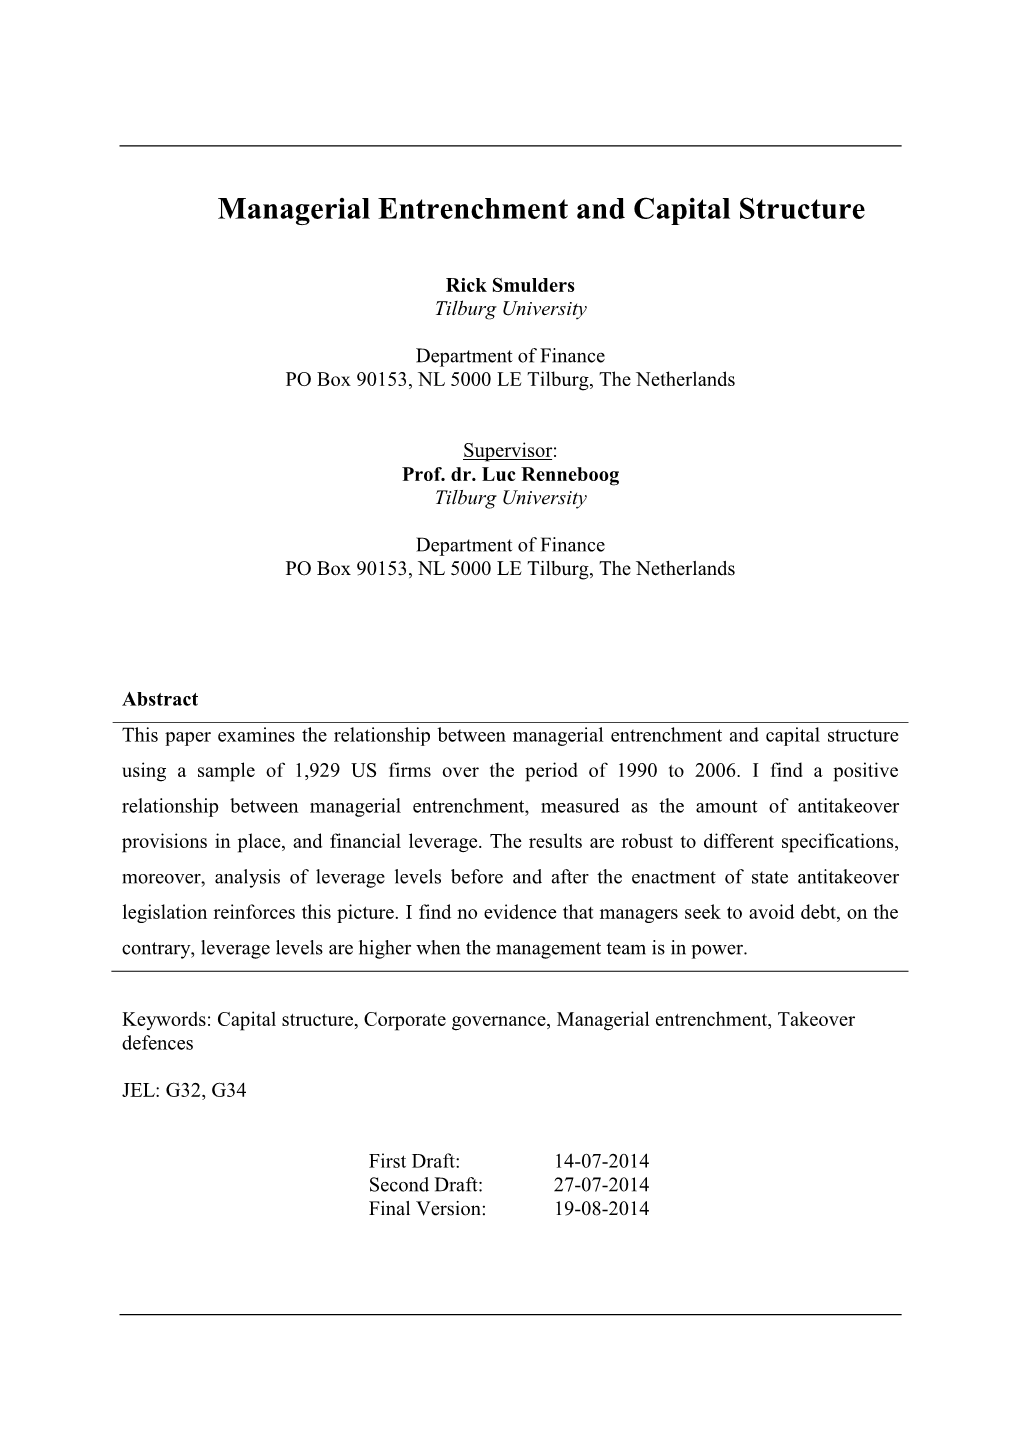 Managerial Entrenchment and Capital Structure